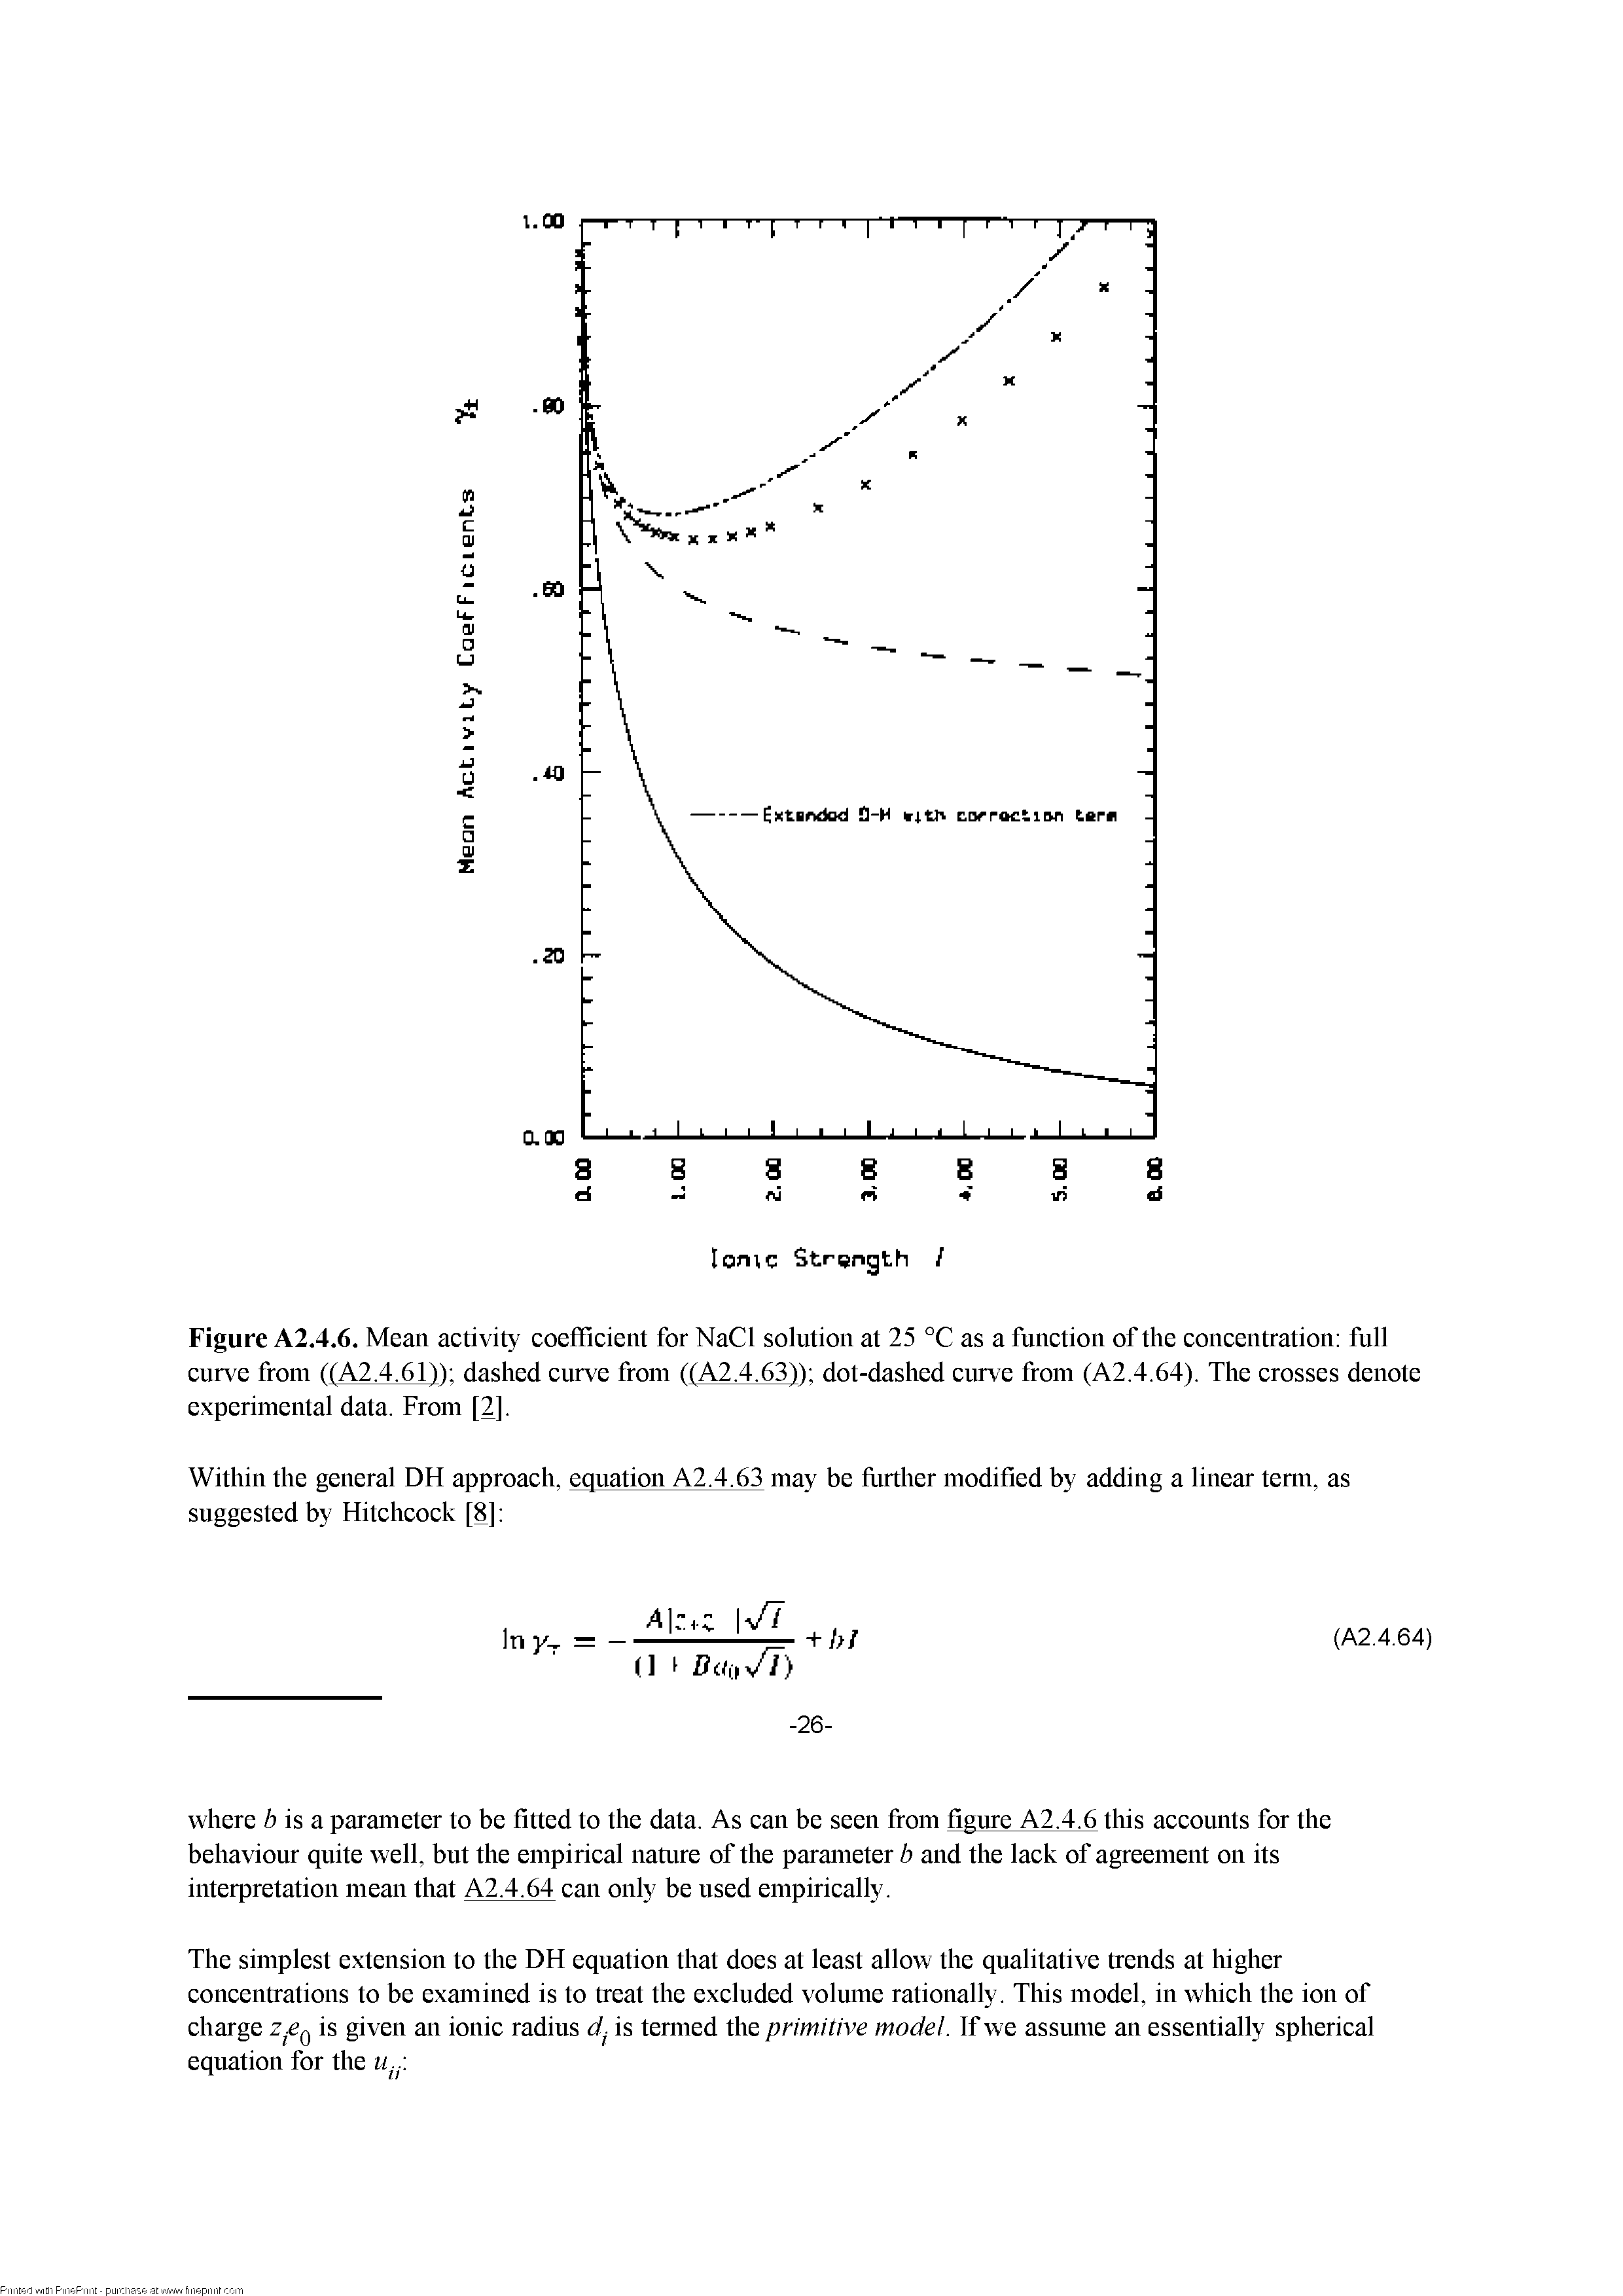 Figure A2.4.6. Mean activity coefFicient for NaCl solution at 25 °C as a function of the concentration full curve from ((A2A61 ) dashed curve from ((A2A63 ) dot-dashed curve from (A2.4.64). The crosses denote experimental data. From [2],...